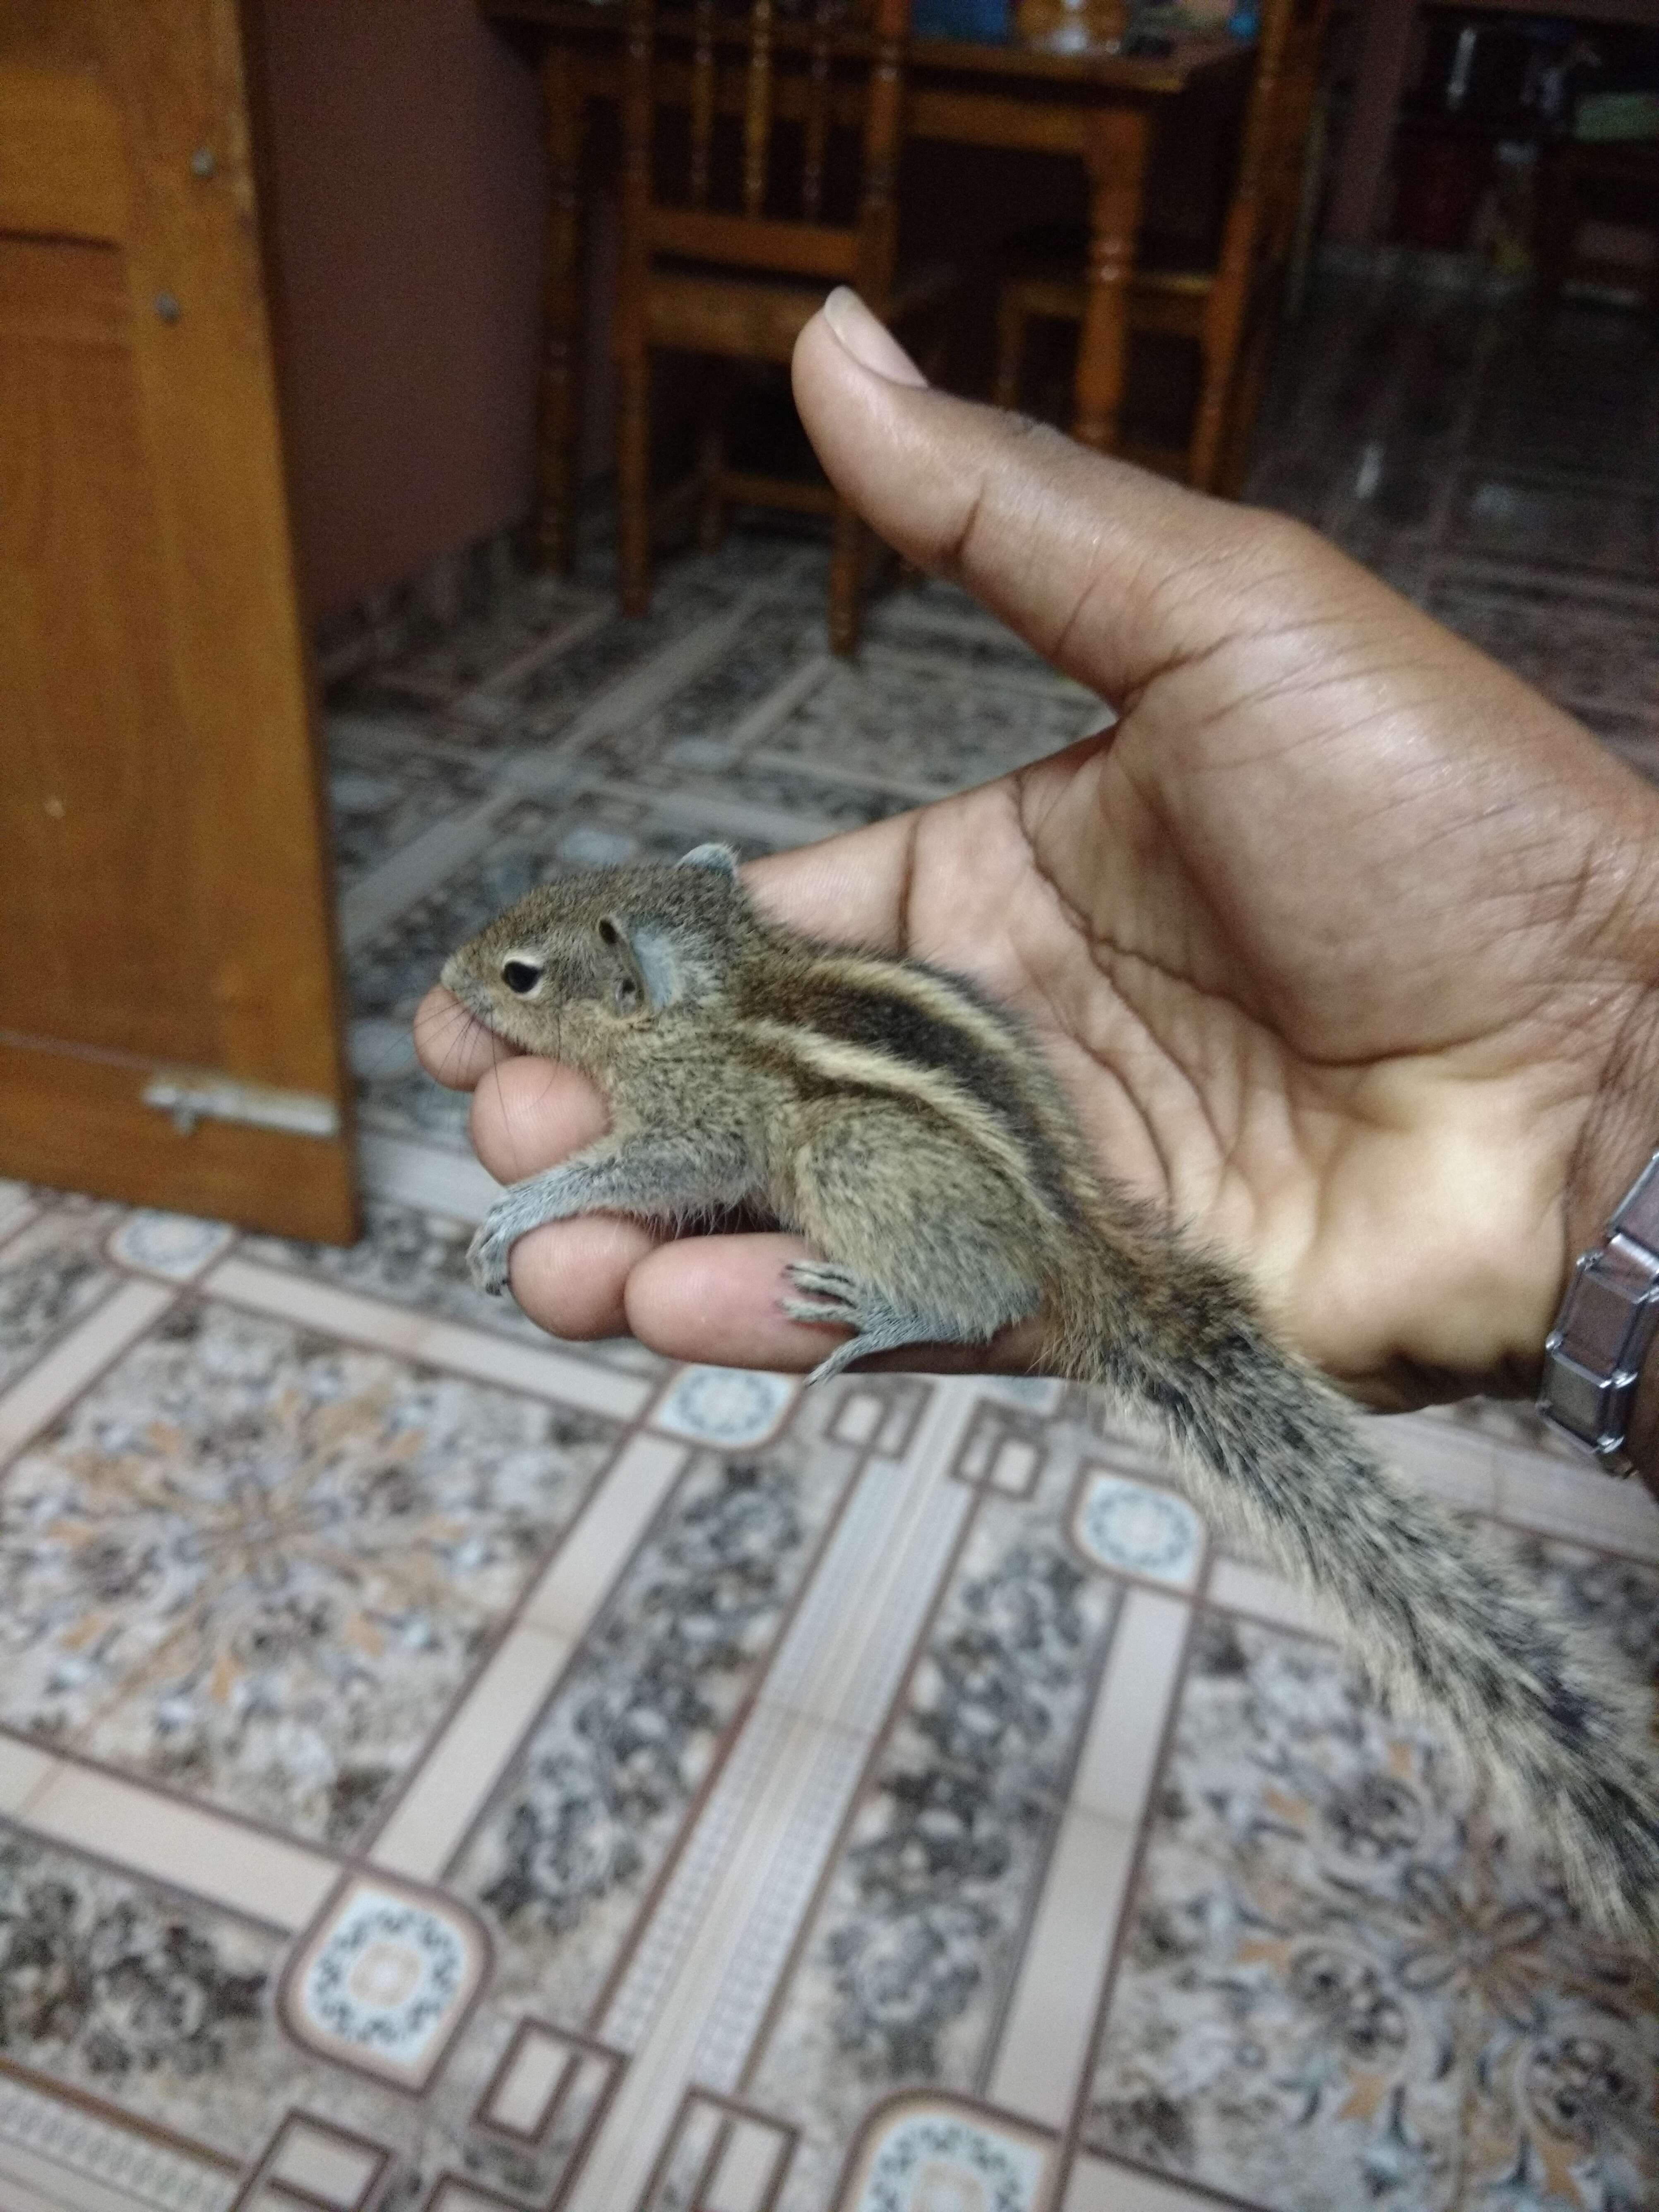 Image of Indian palm squirrel